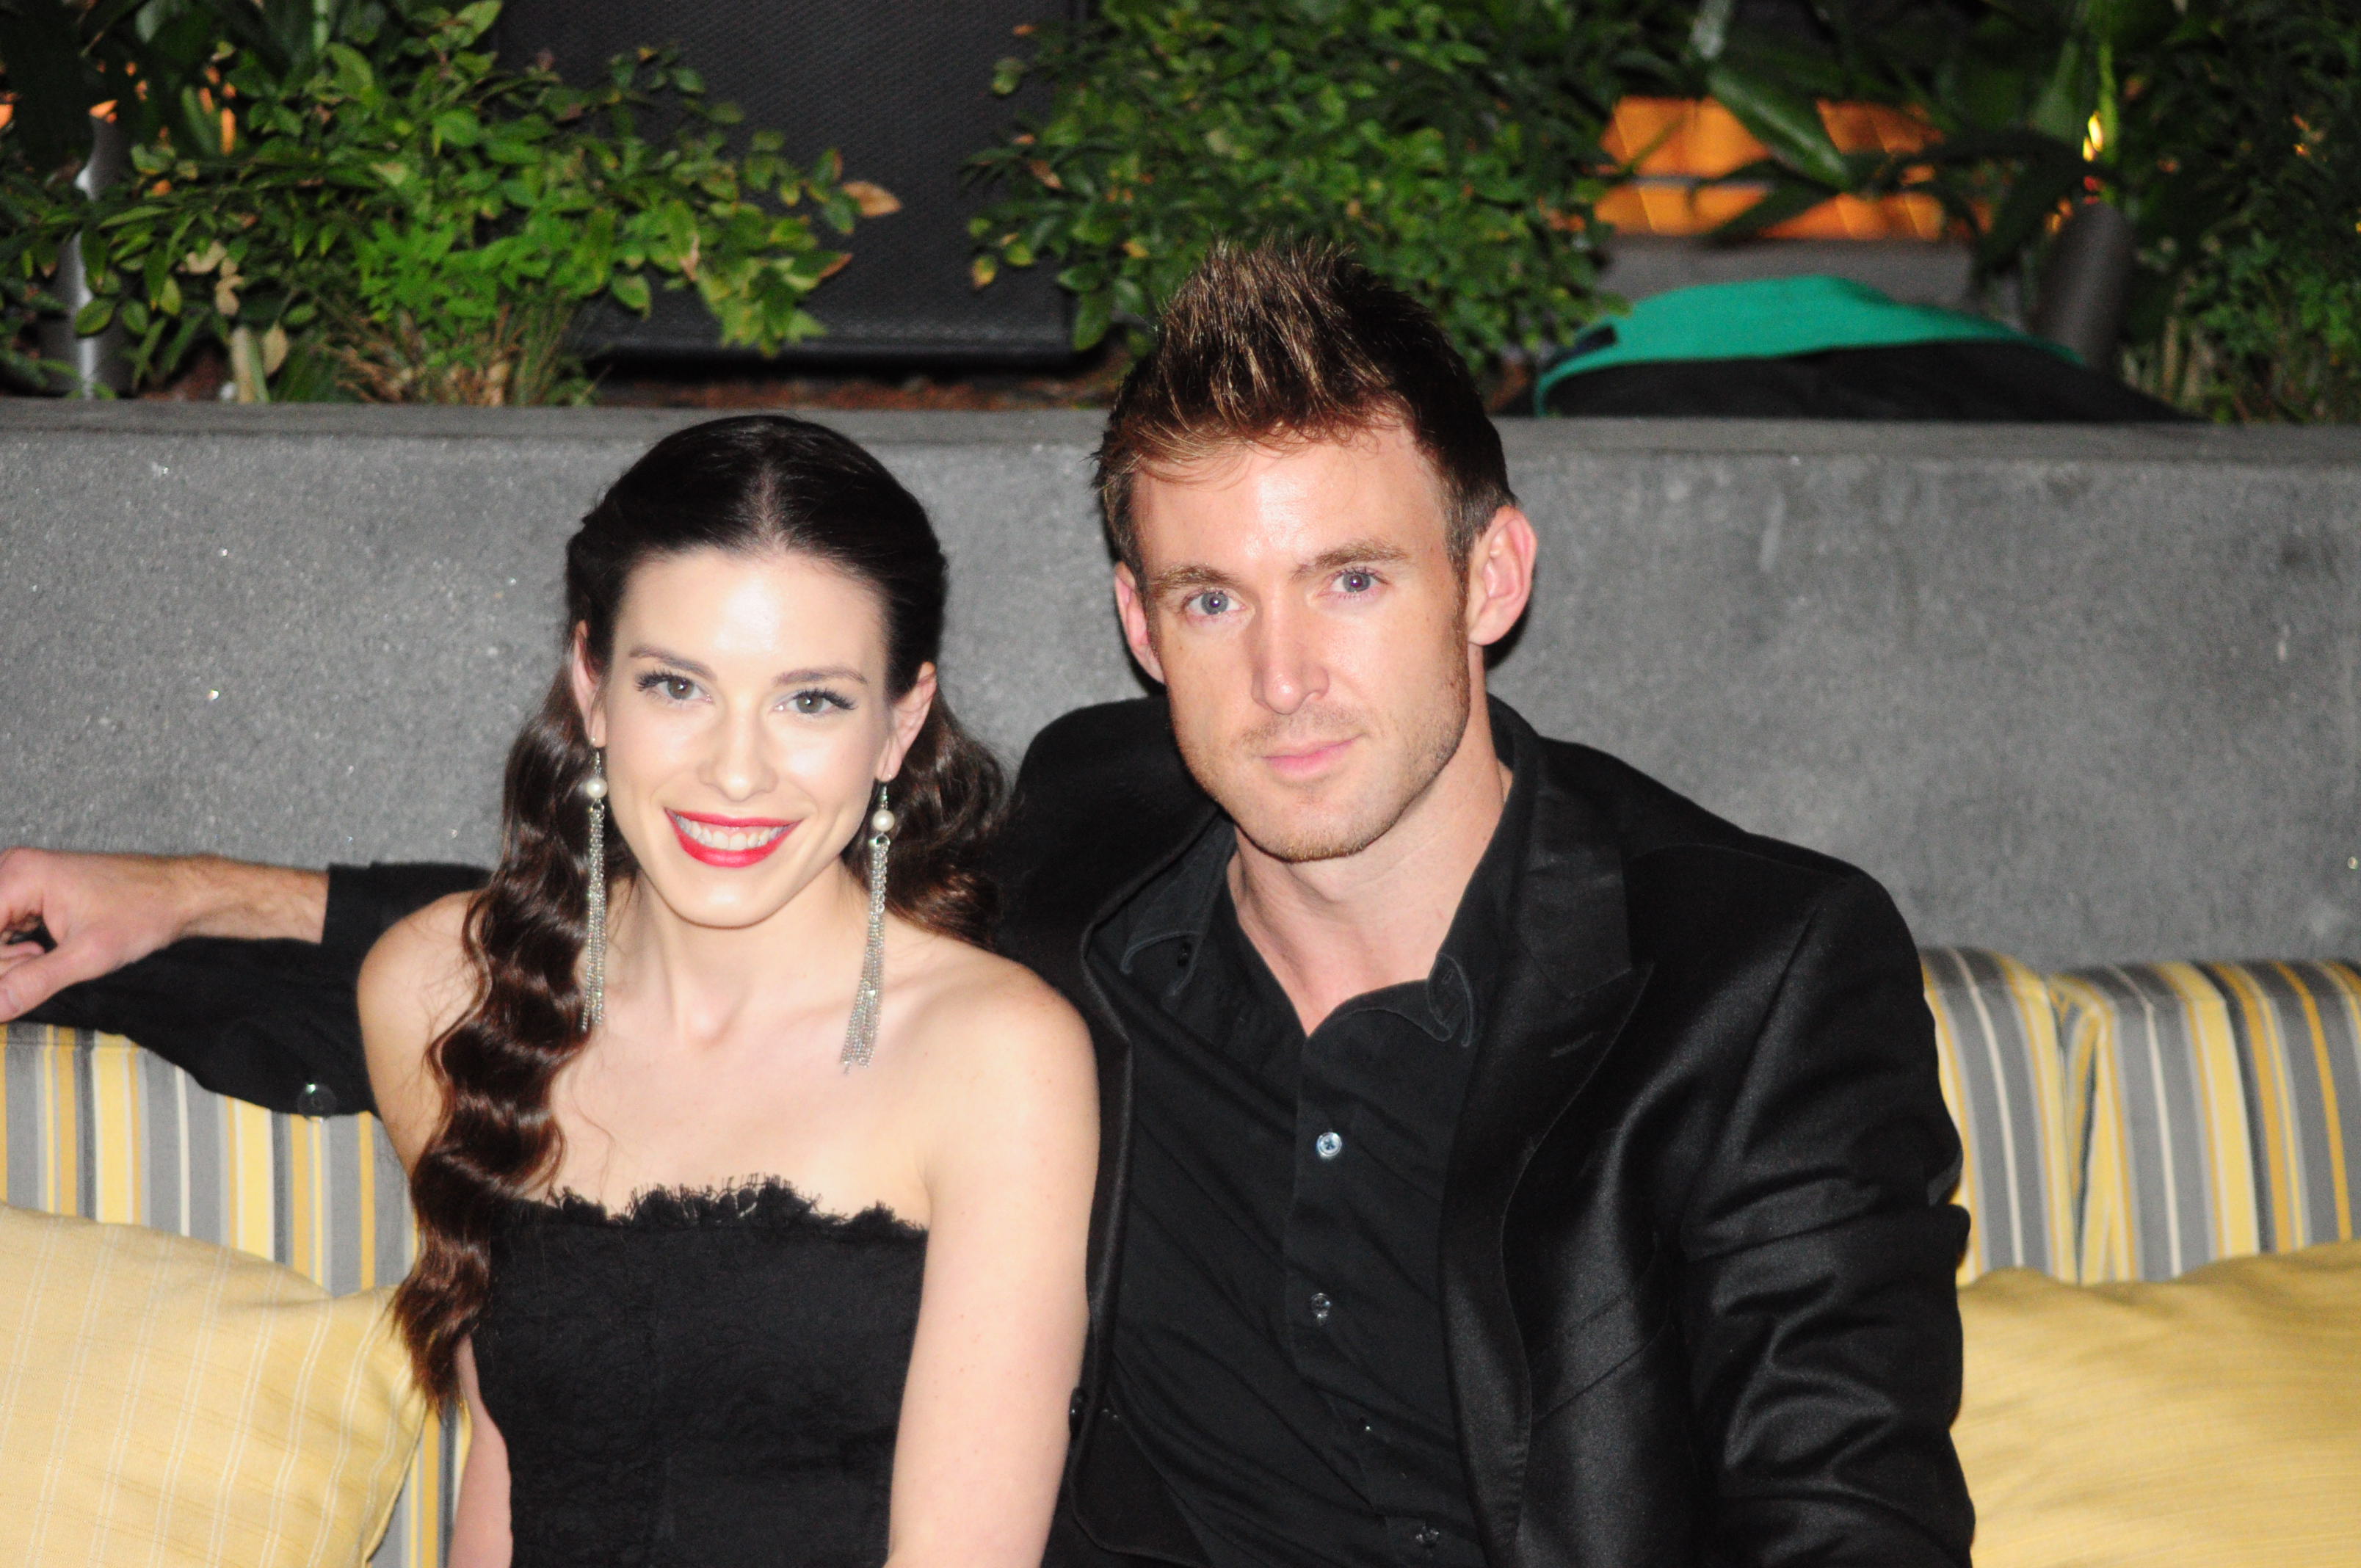 Lauren Calaway and Scott Ford at Lauren Elaine: The Black Label premiere in Hollywood